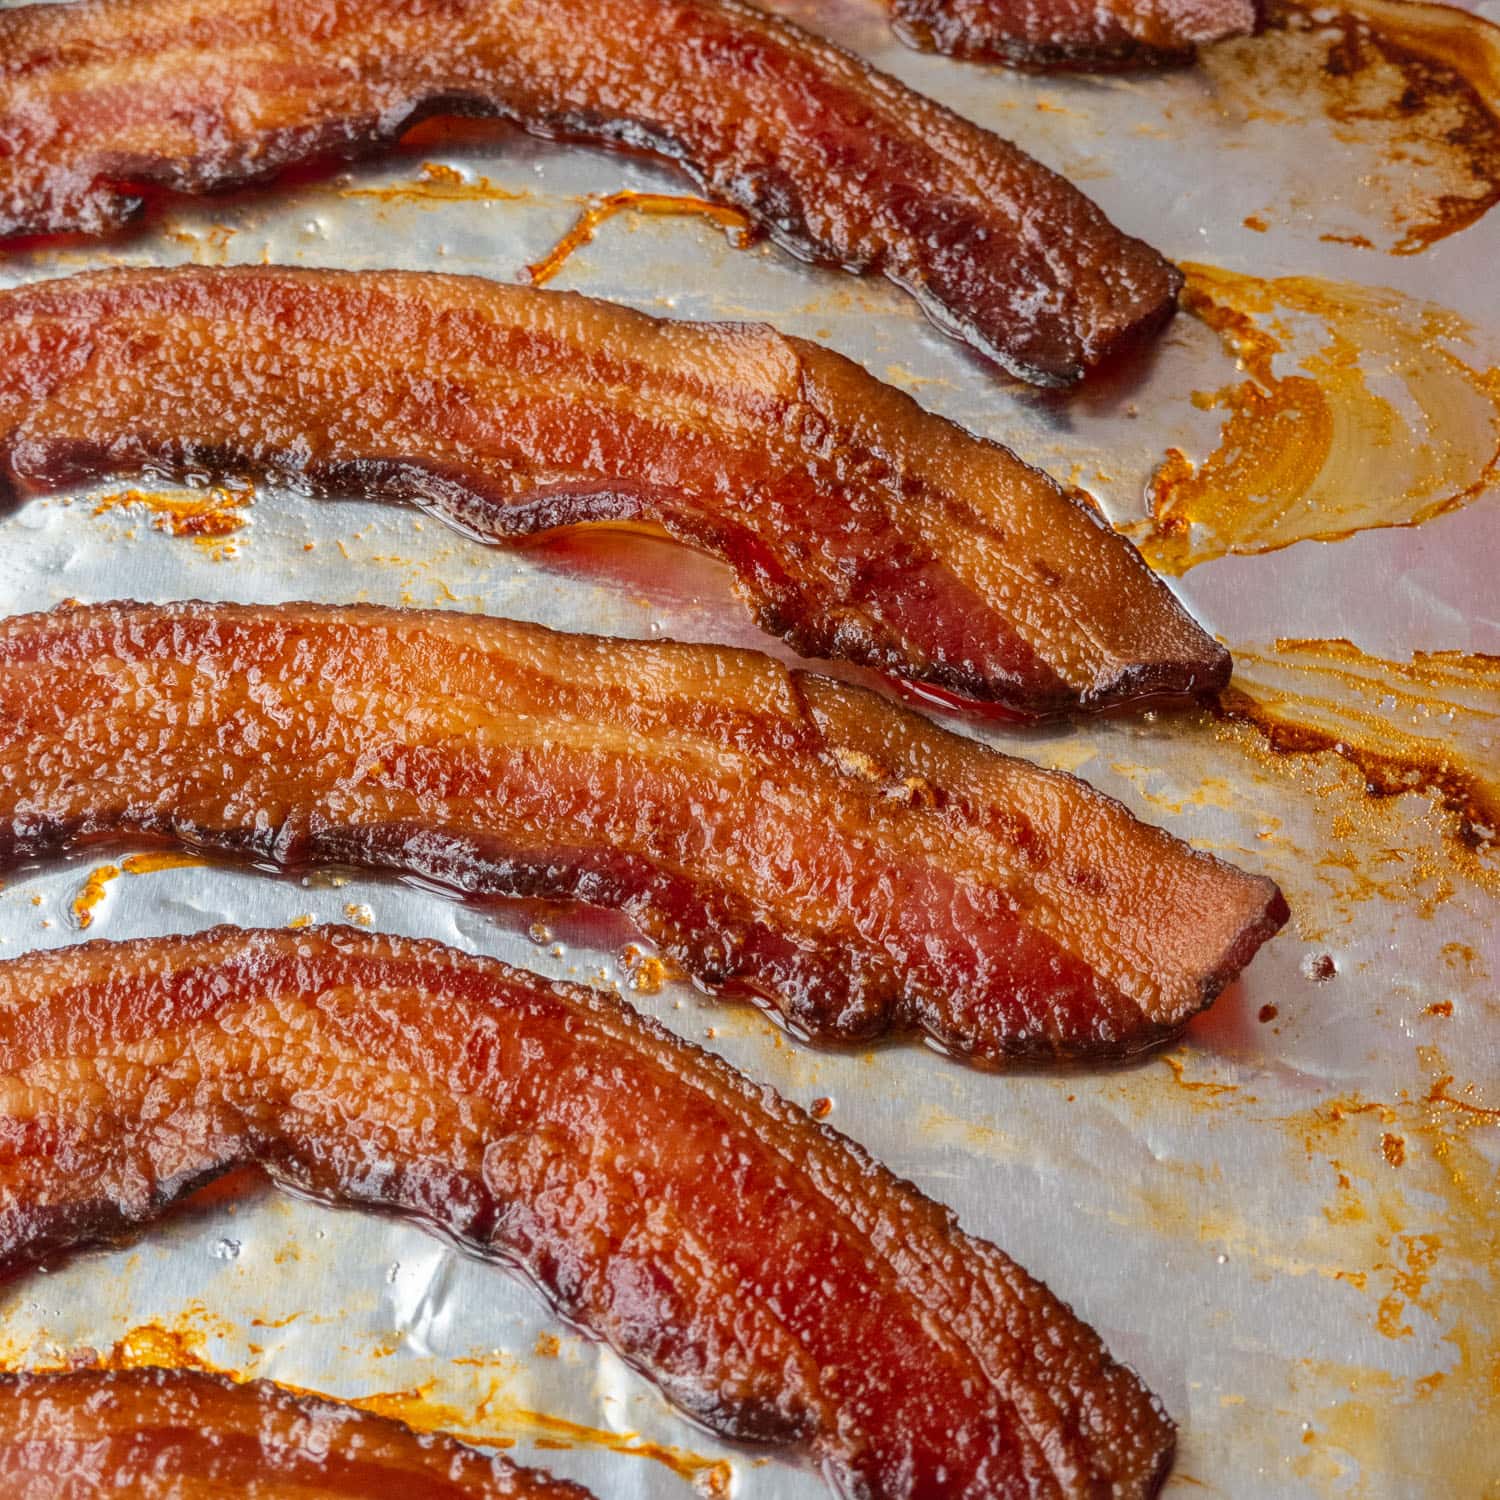 https://brooklynfarmgirl.com/wp-content/uploads/2023/02/How-to-Cook-Bacon-In-The-Oven-Featured-Image.jpg